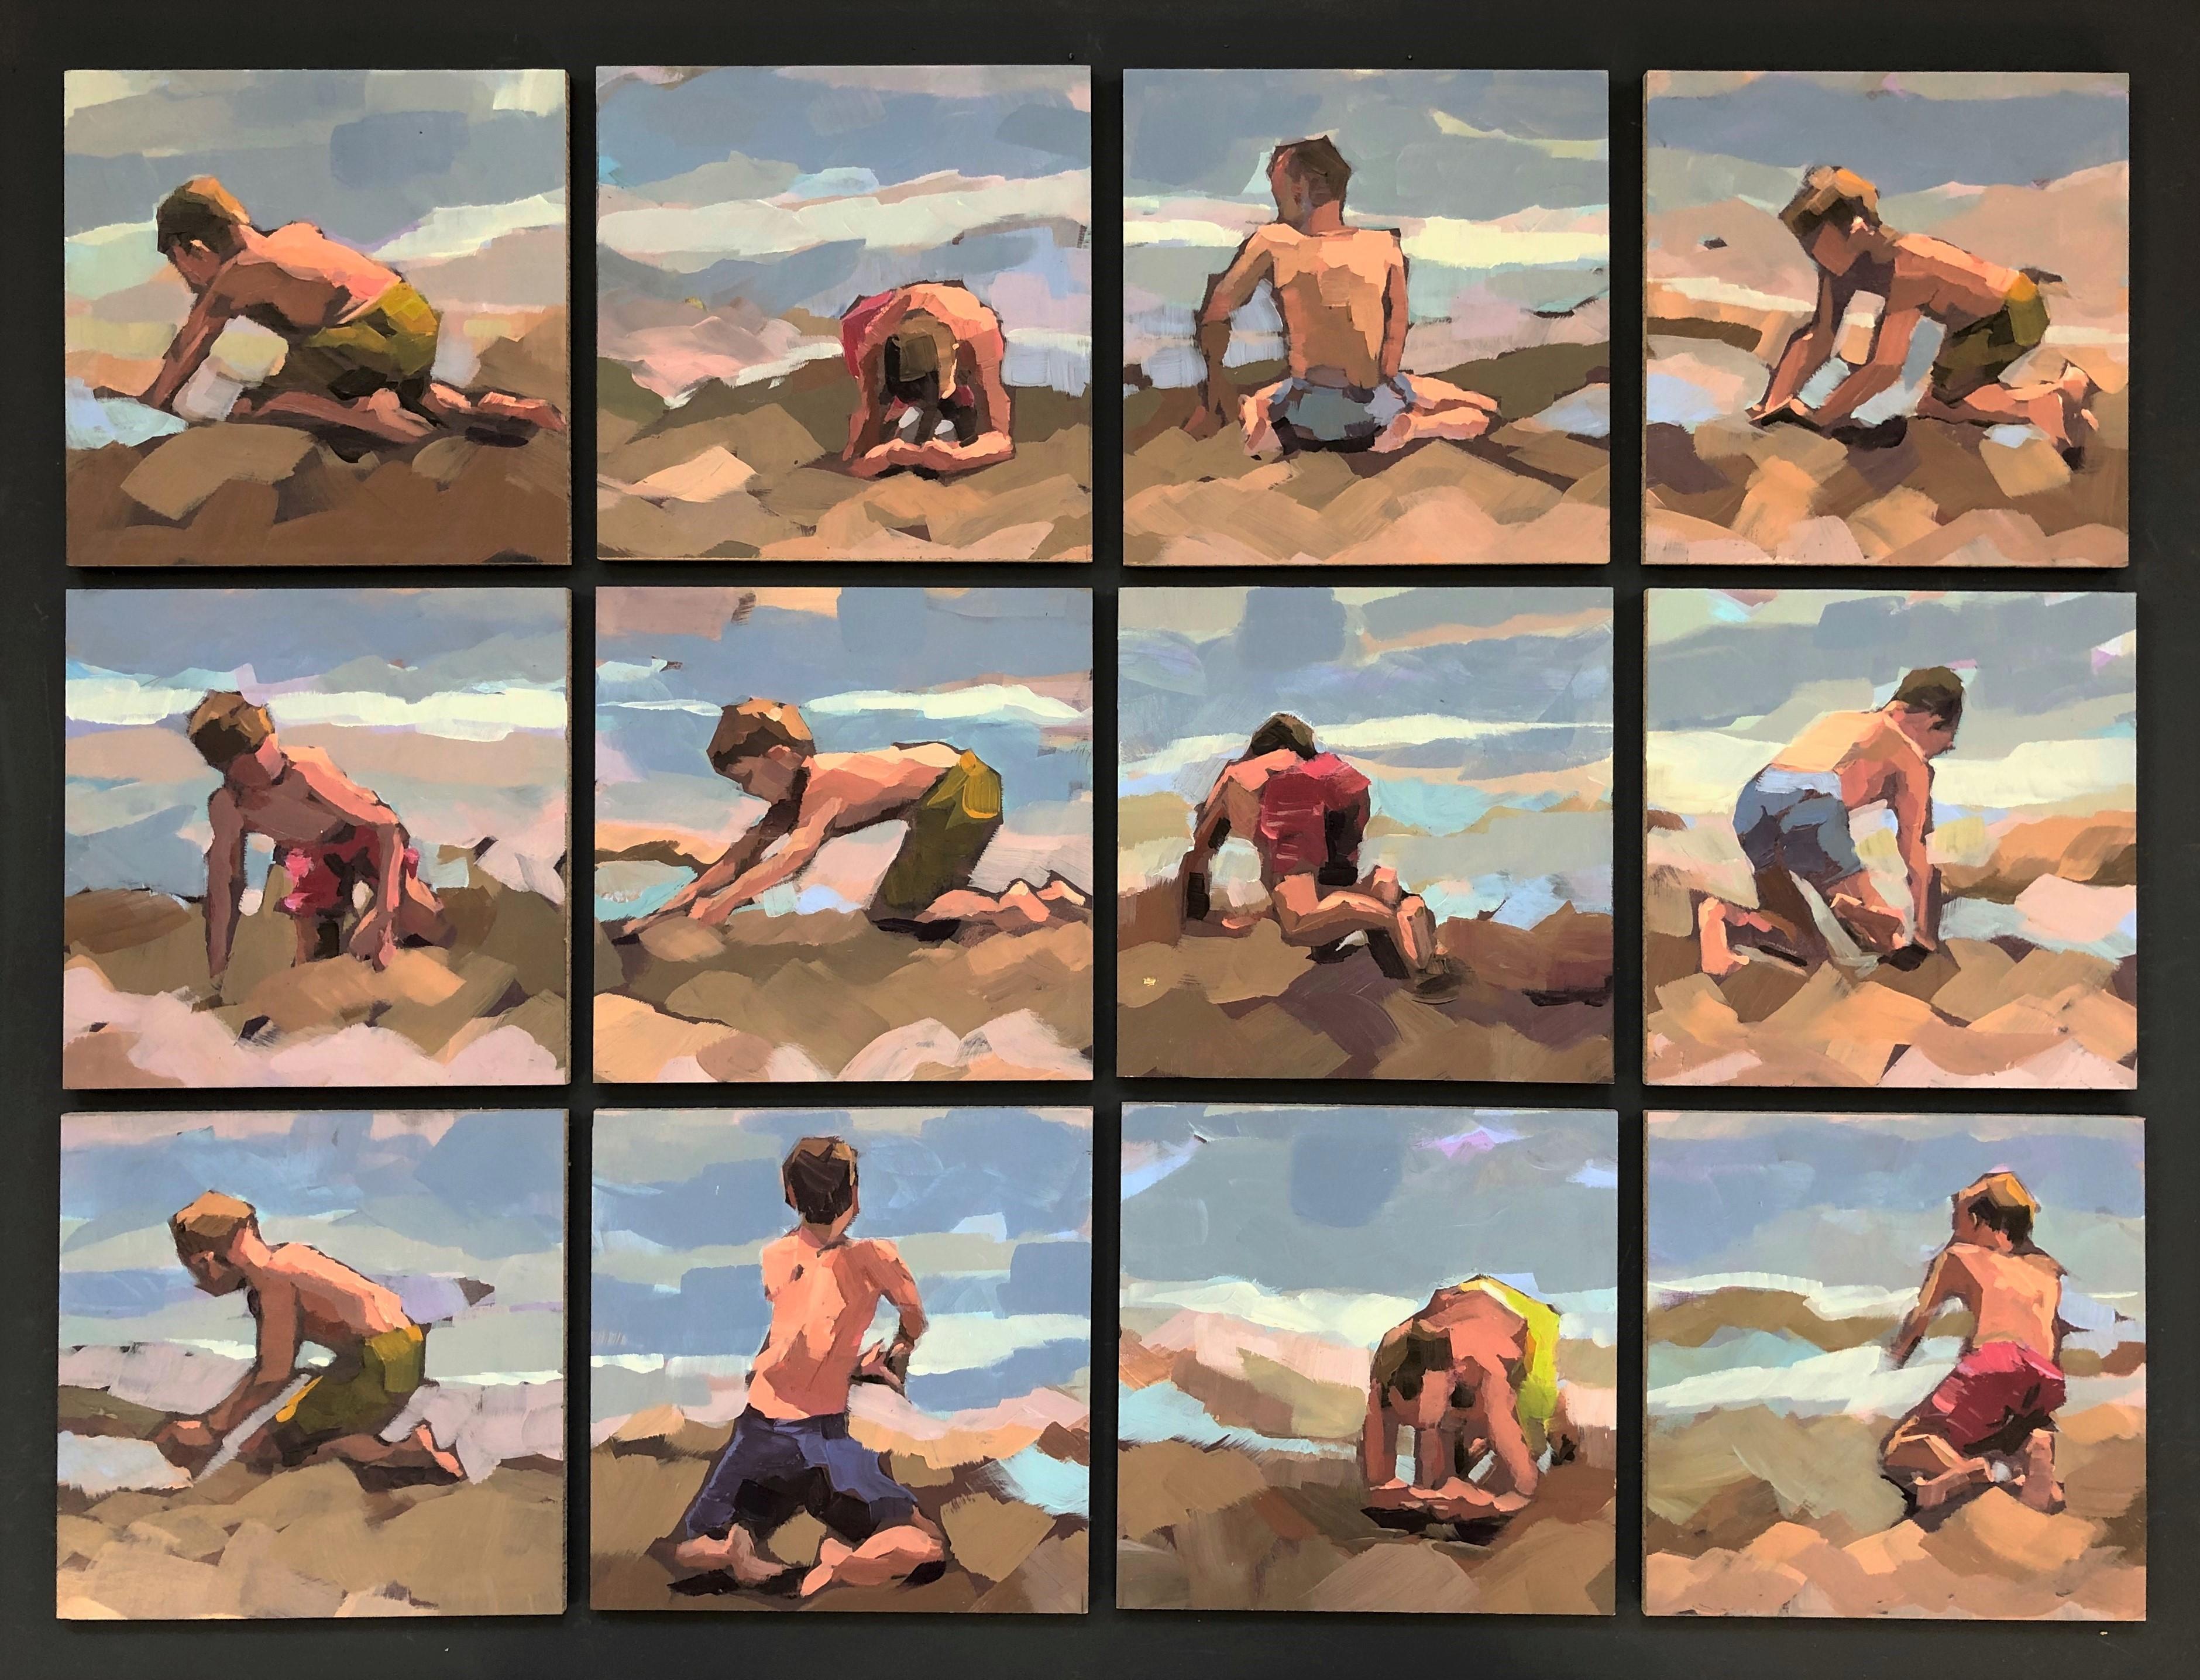 Beach Boys, 12 Small Acrylic Paintings in one frame by Dutch artist Mitzy Renooy